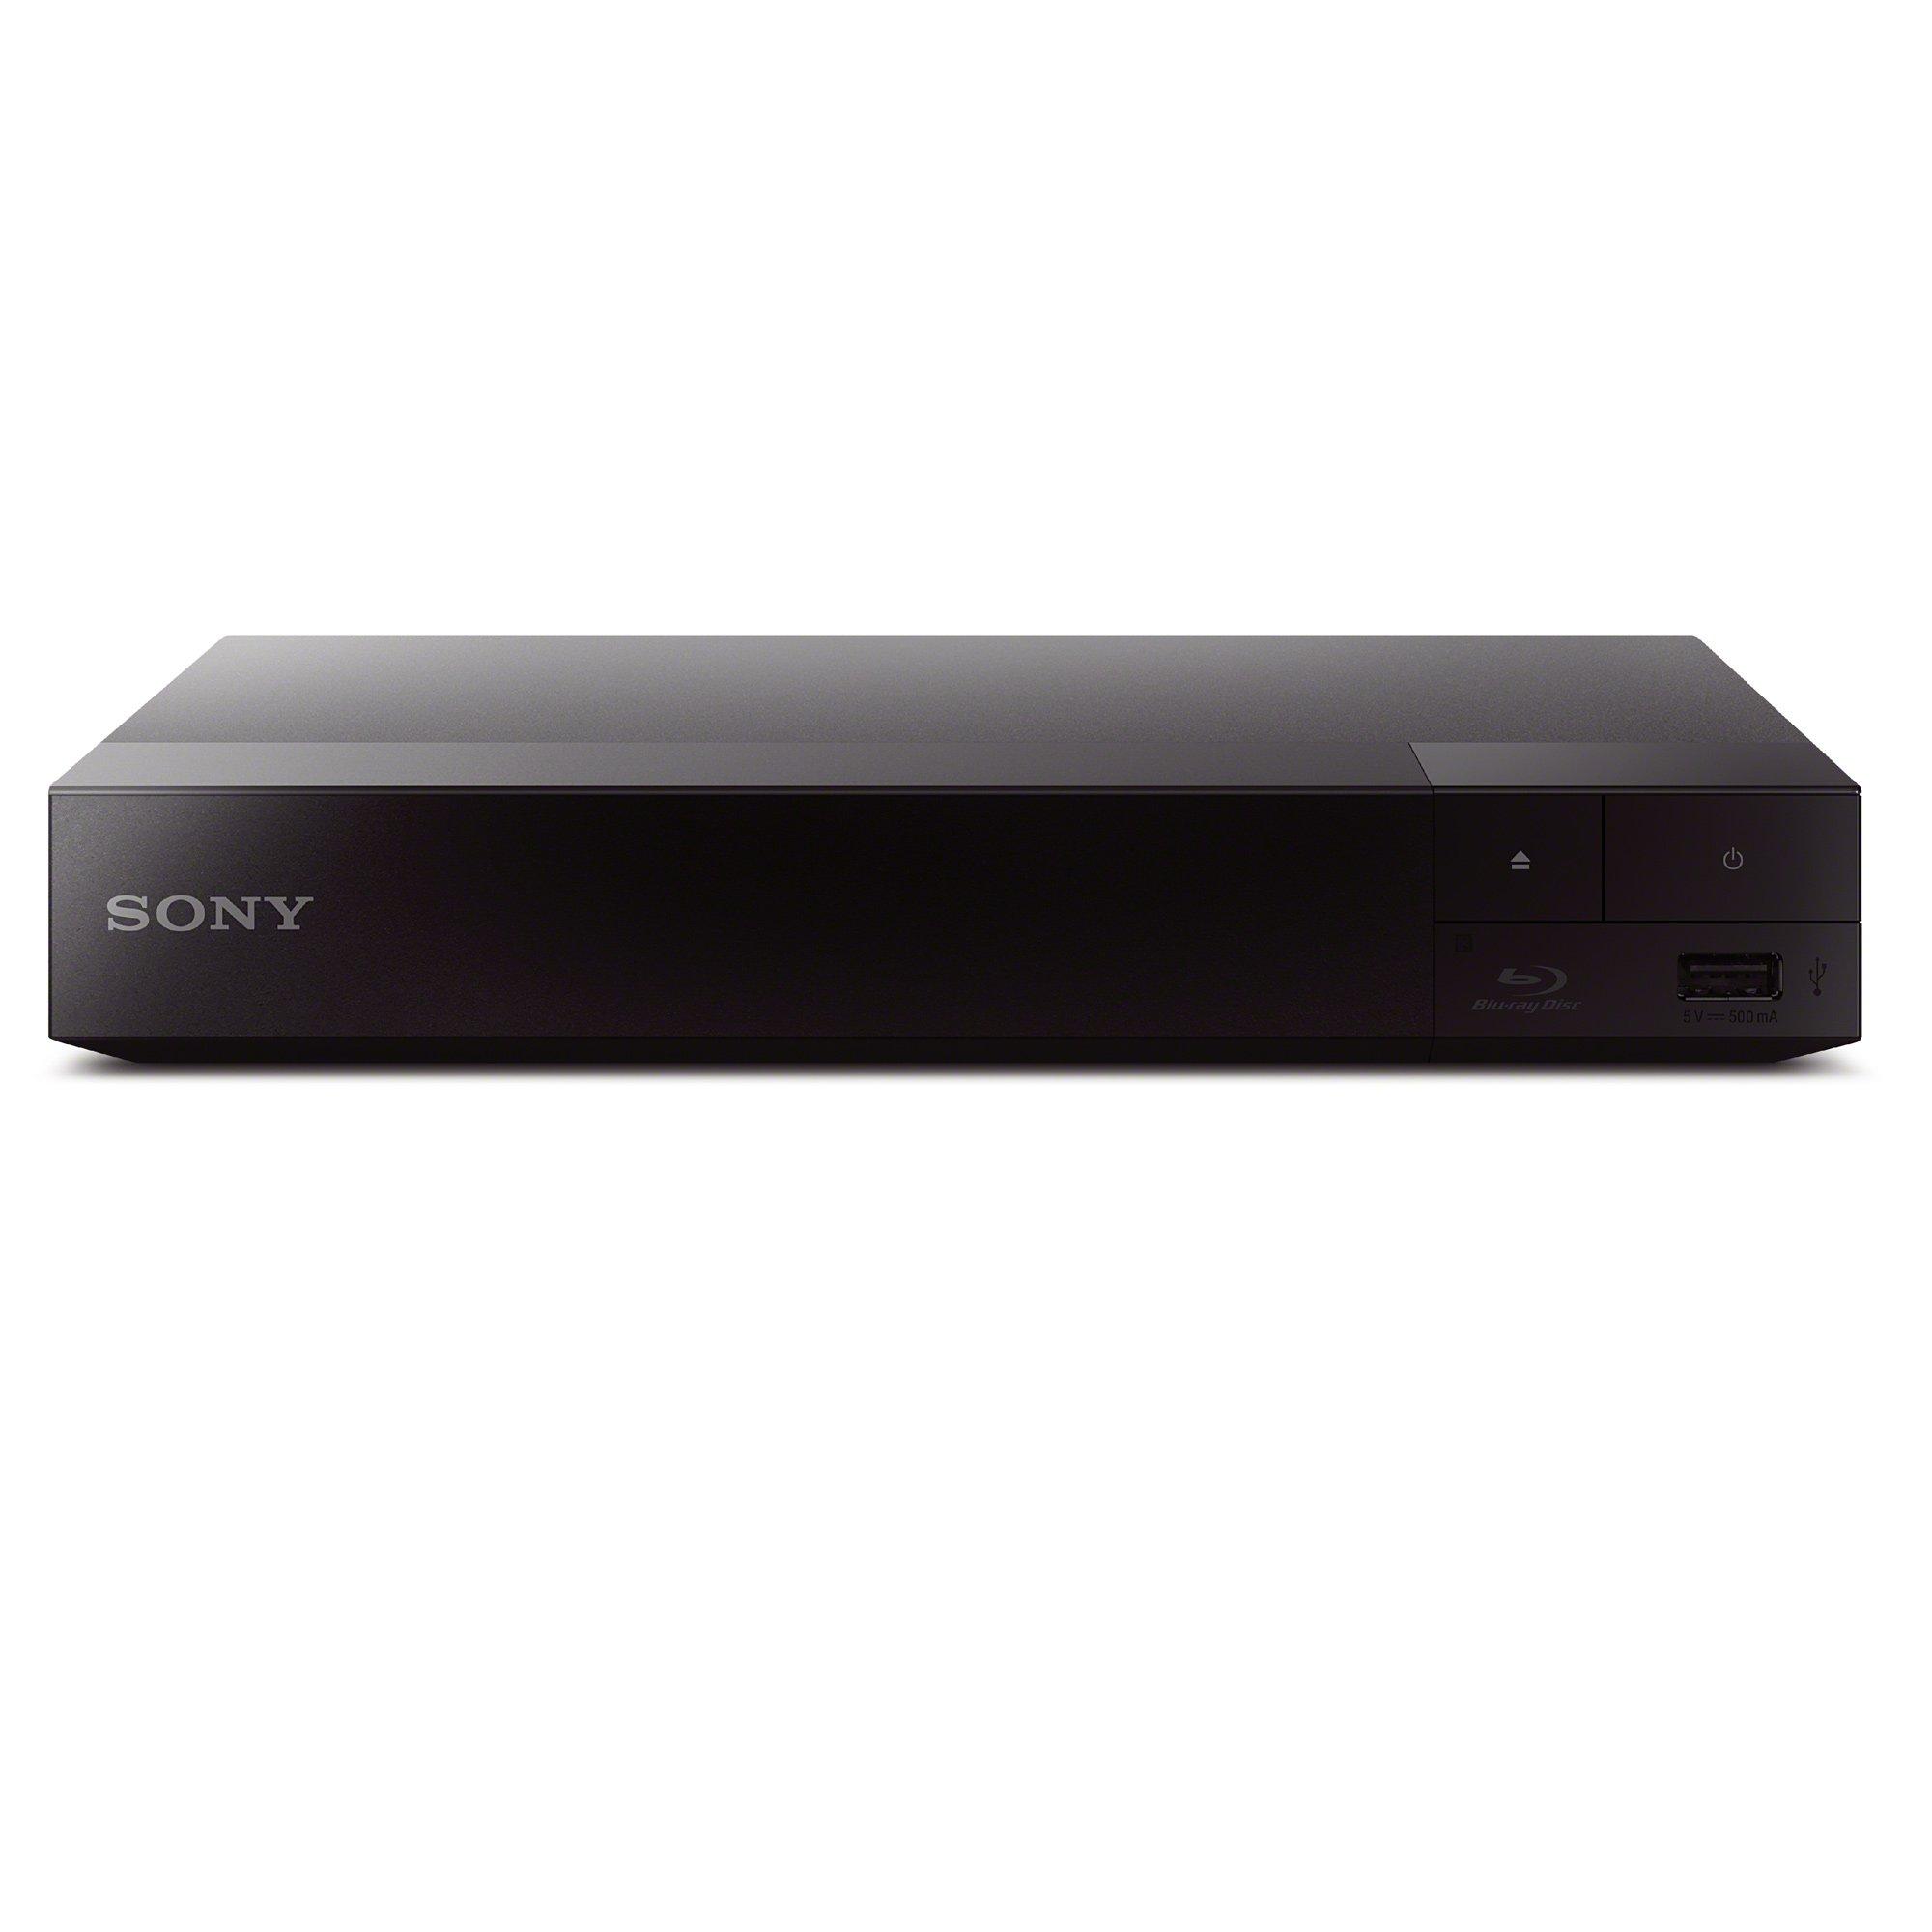 Image of SONY BDPS 1700 Blu-ray-Player